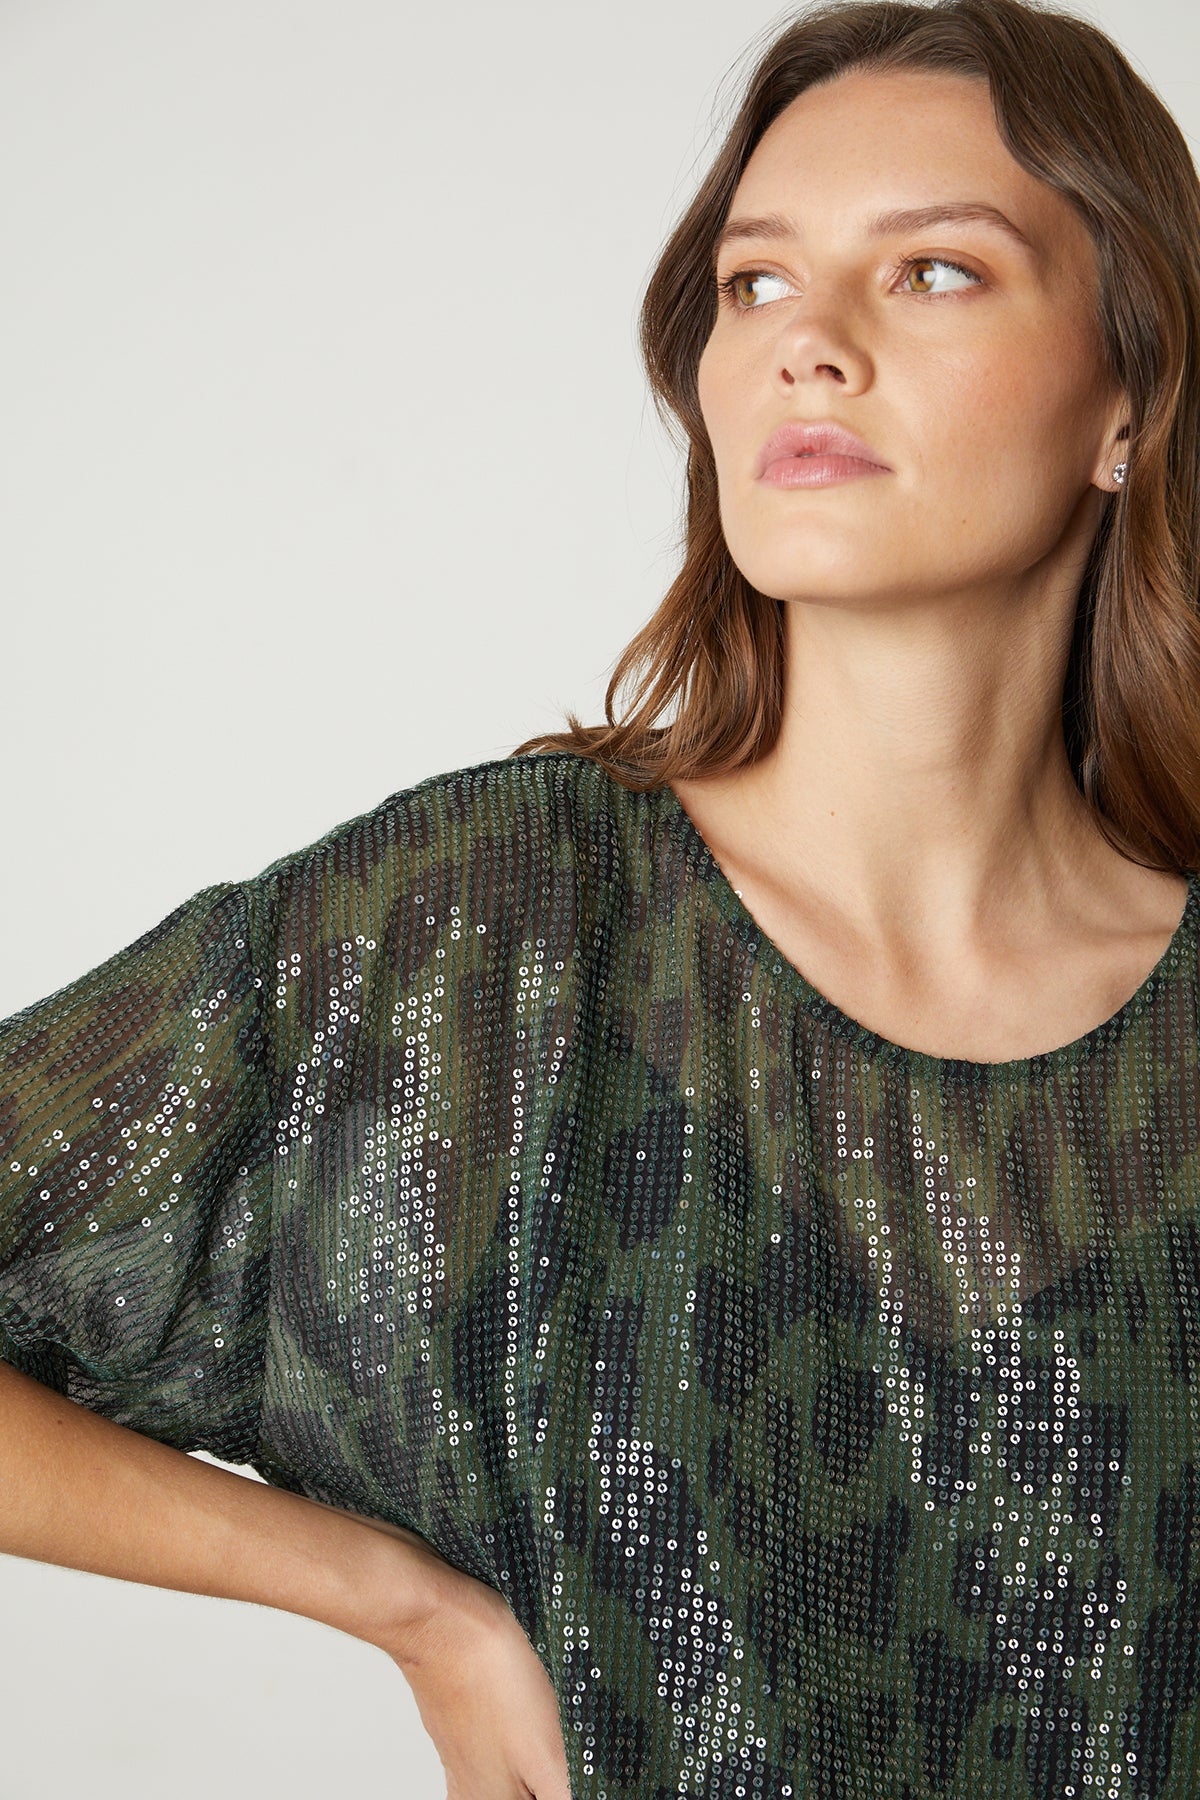 Alessa Printed Sequin Top in airbrush muted green and black mottled pattern front detail-25668282351809